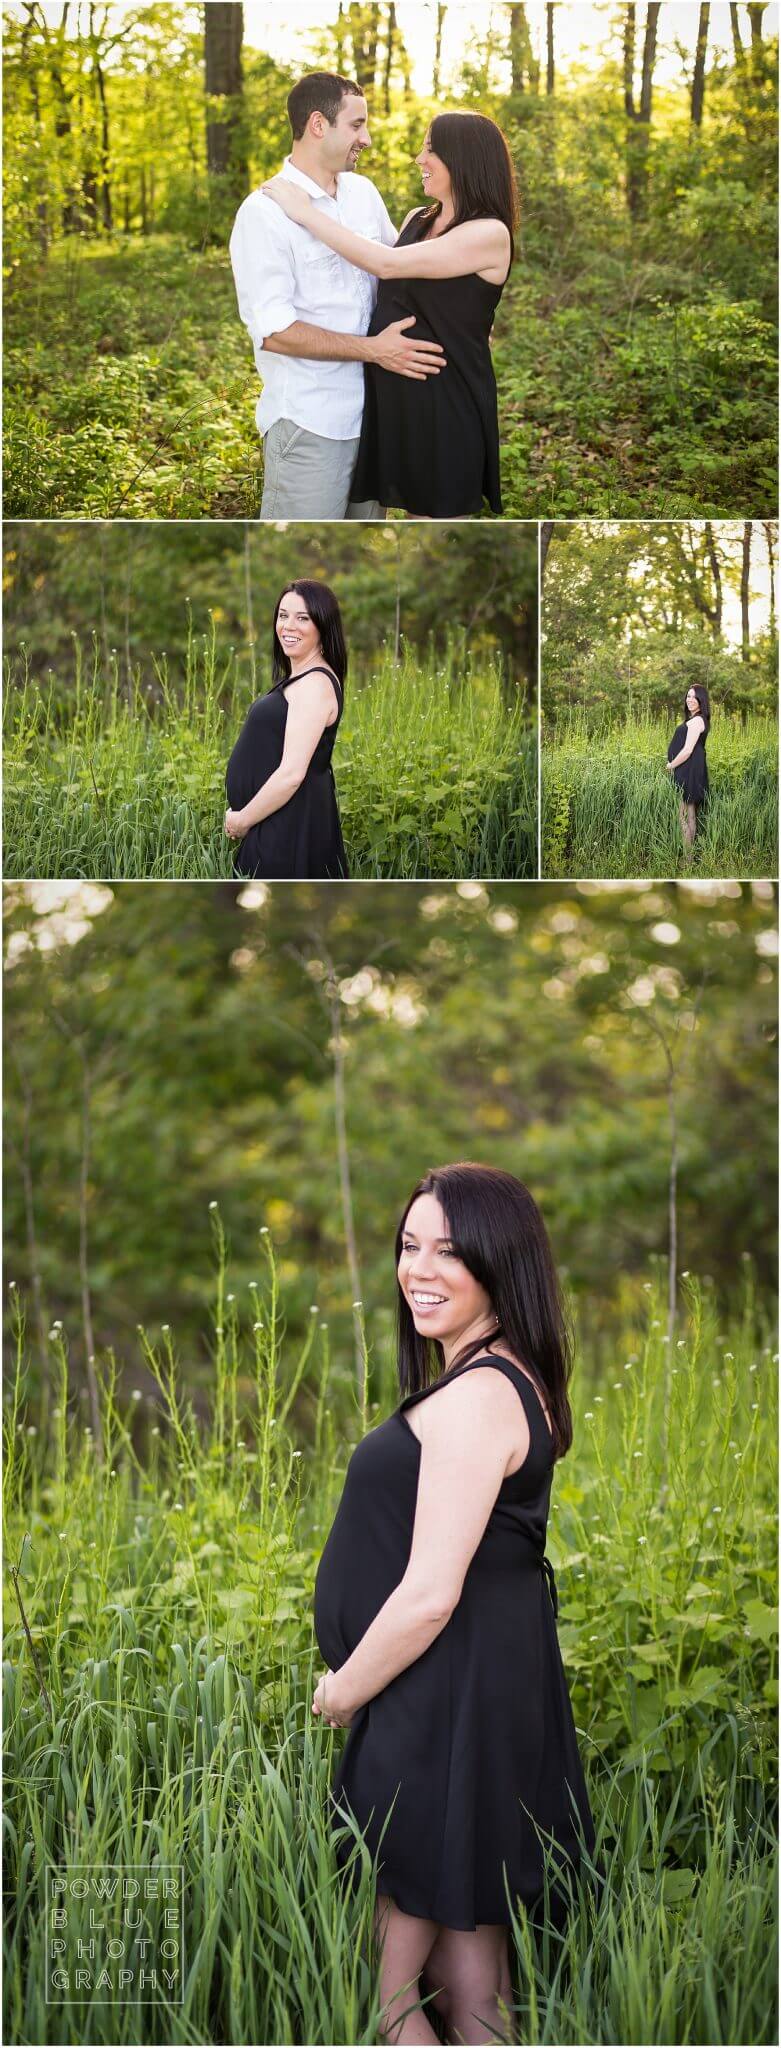 pittsburgh maternity photographer. maternity portrait session in natural setting with tall grasses and hazy sunset backlighting.